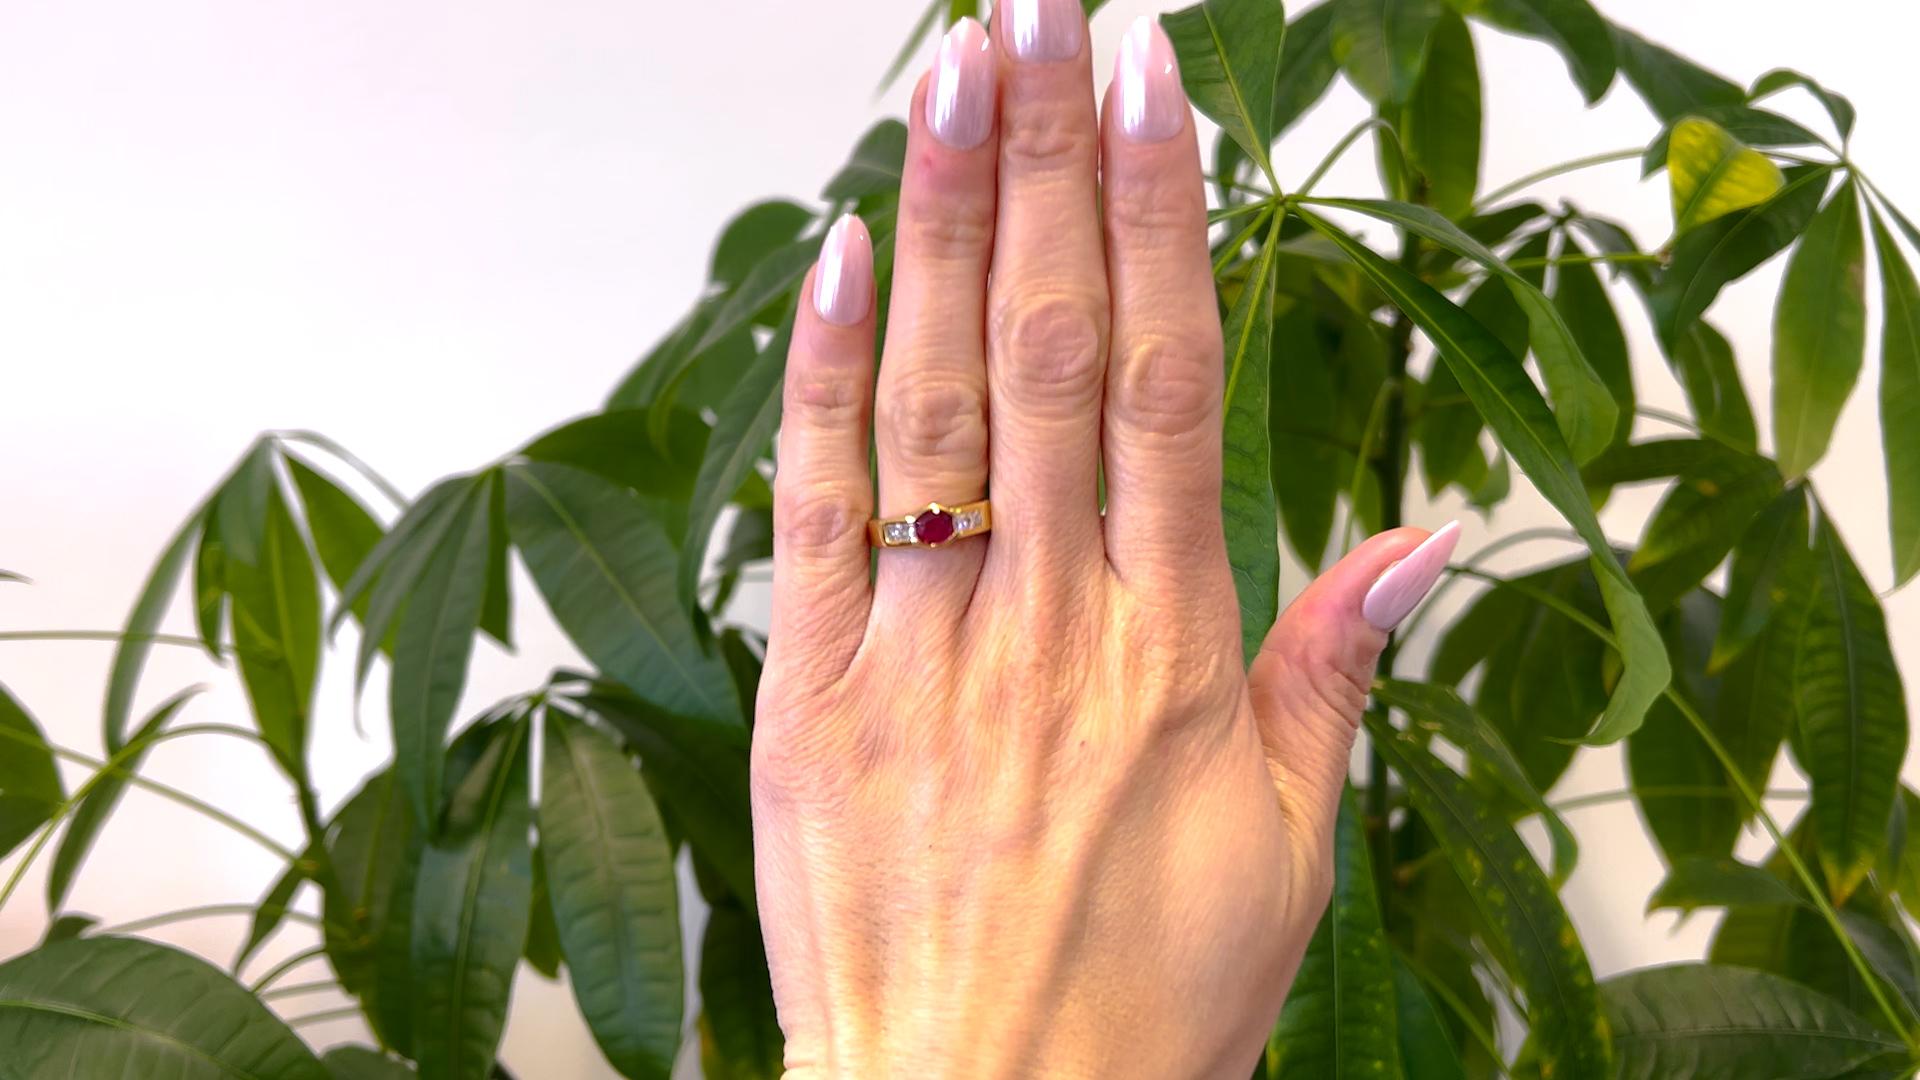 One Vintage French Ruby Diamond 18k Yellow Gold Ring. Featuring one oval mixed cut ruby weighing approximately 0.75 carat. Accented by four princess cut diamonds with a total weight of approximately 0.40 carat, graded F-G color, VS clarity. Crafted